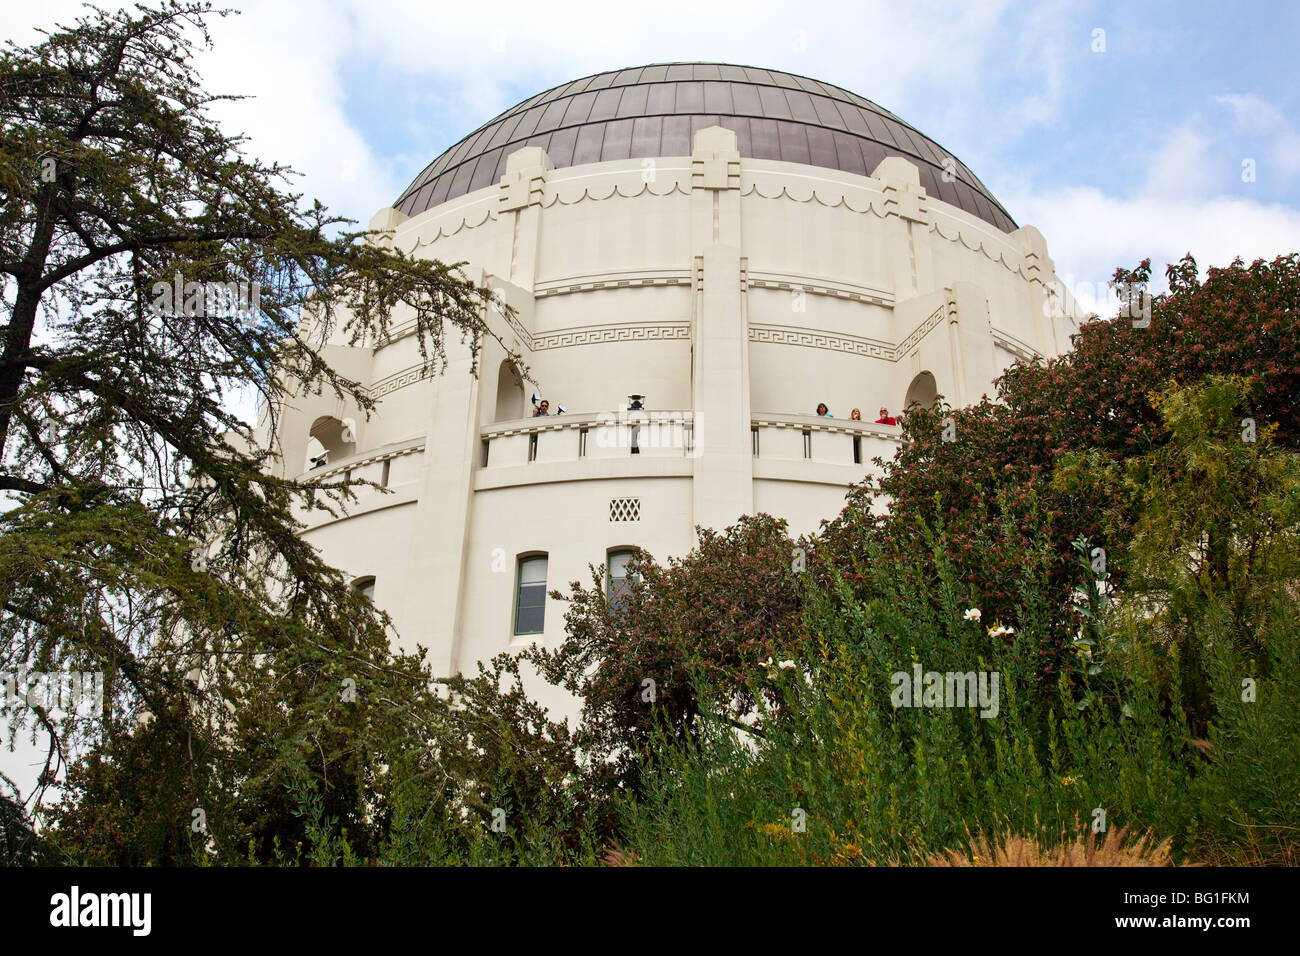 Griffith astrological Observatory in Los Angeles California Stock Photo